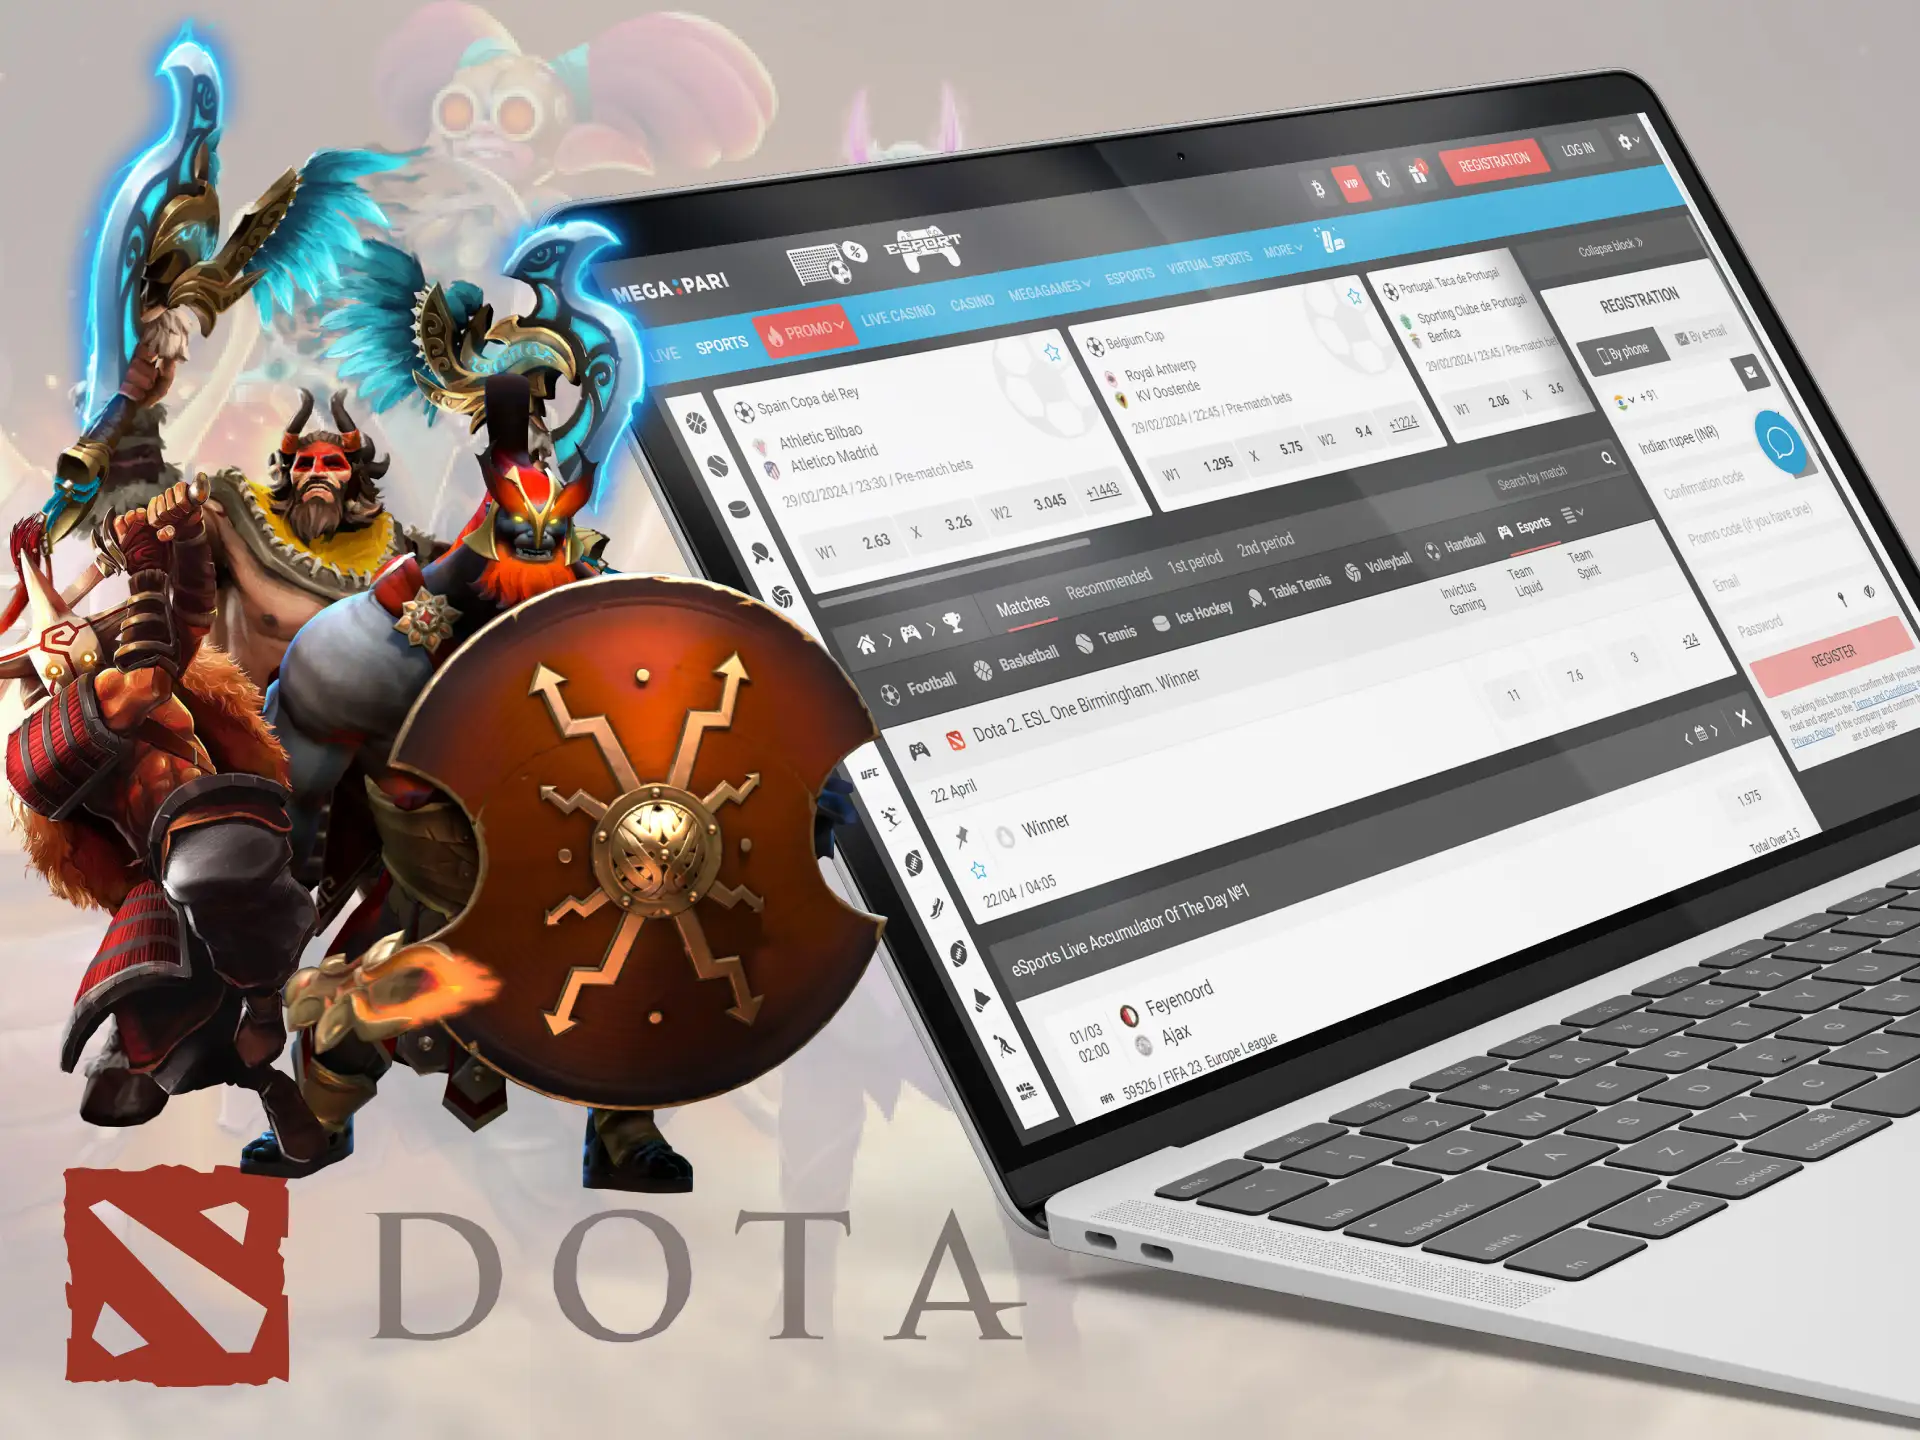 General terms necessary for betting on Dota 2.